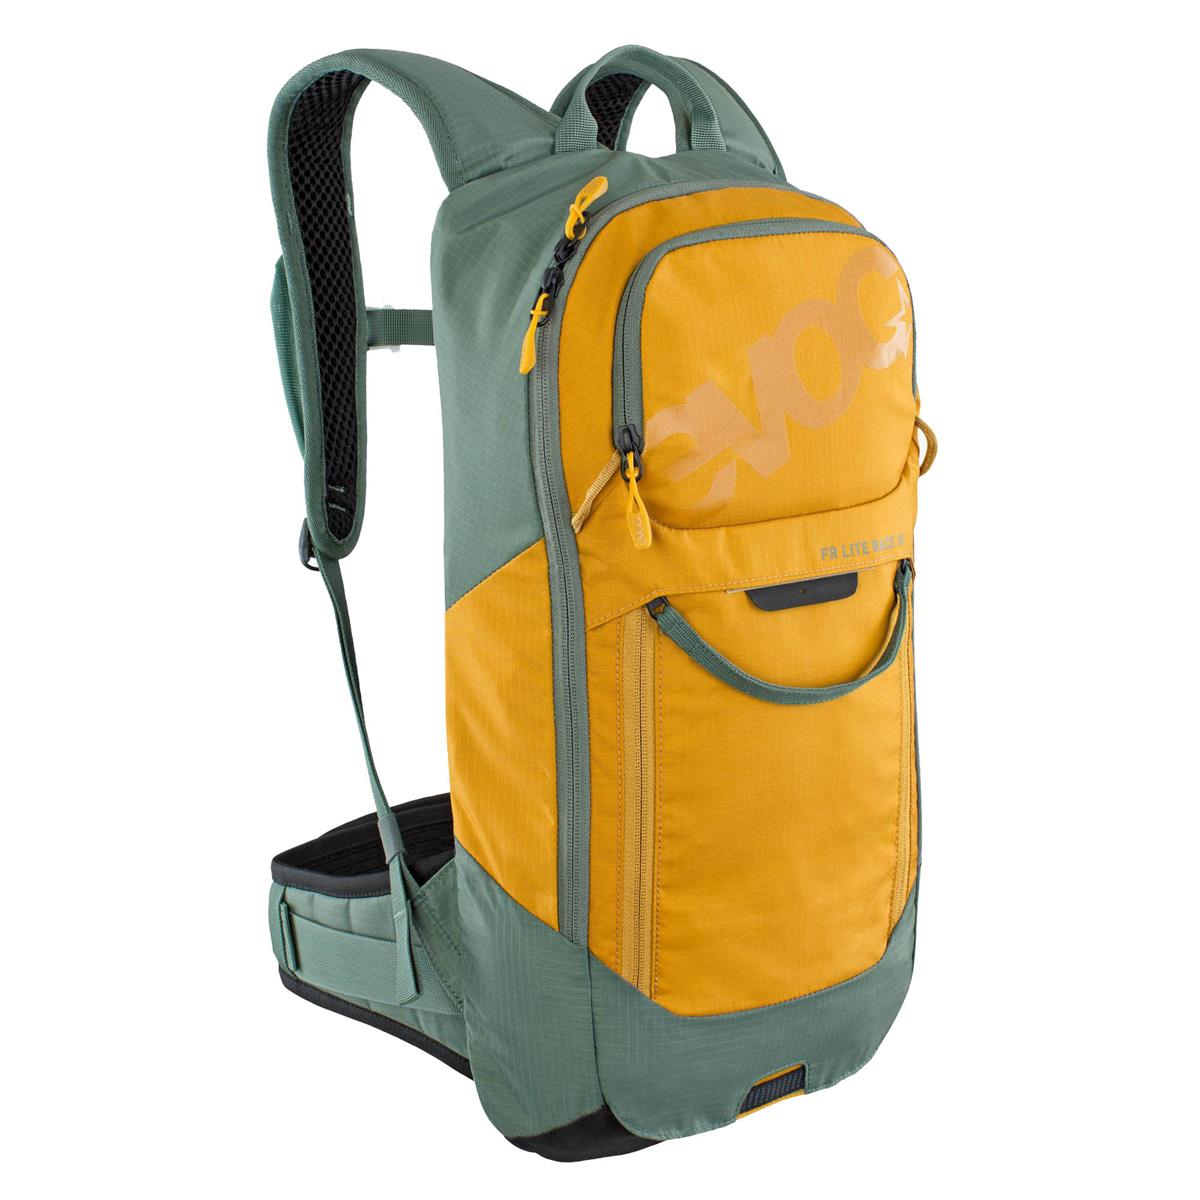 FR LITE RACE 10 Backpack With Back Protector 10L Green/Orange Size S